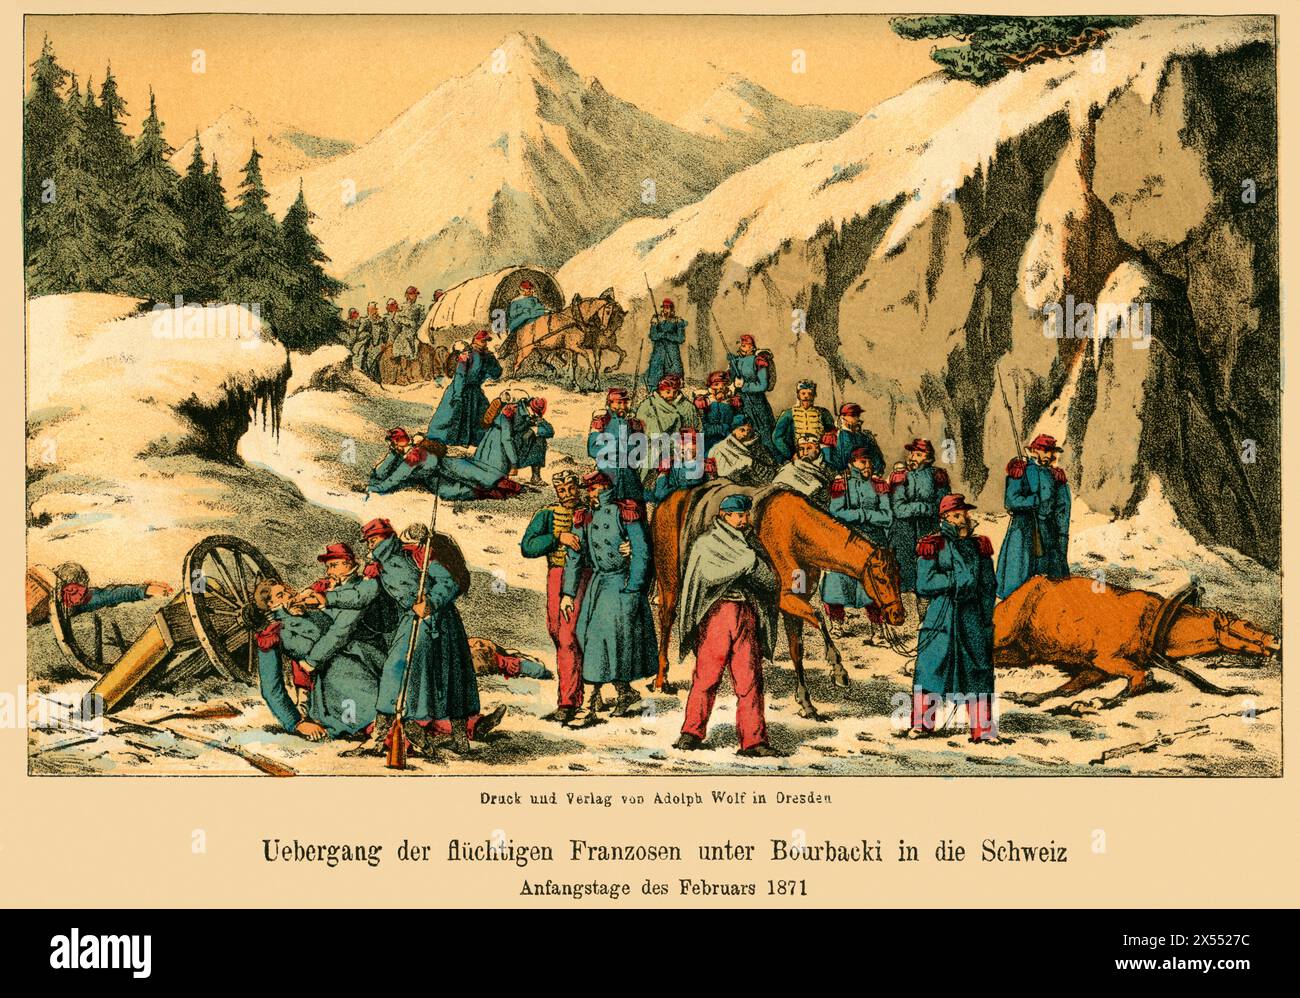 events, Switzerland, Franco-Prussion war, 1870-1871, ARTIST'S COPYRIGHT HAS NOT TO BE CLEARED Stock Photo